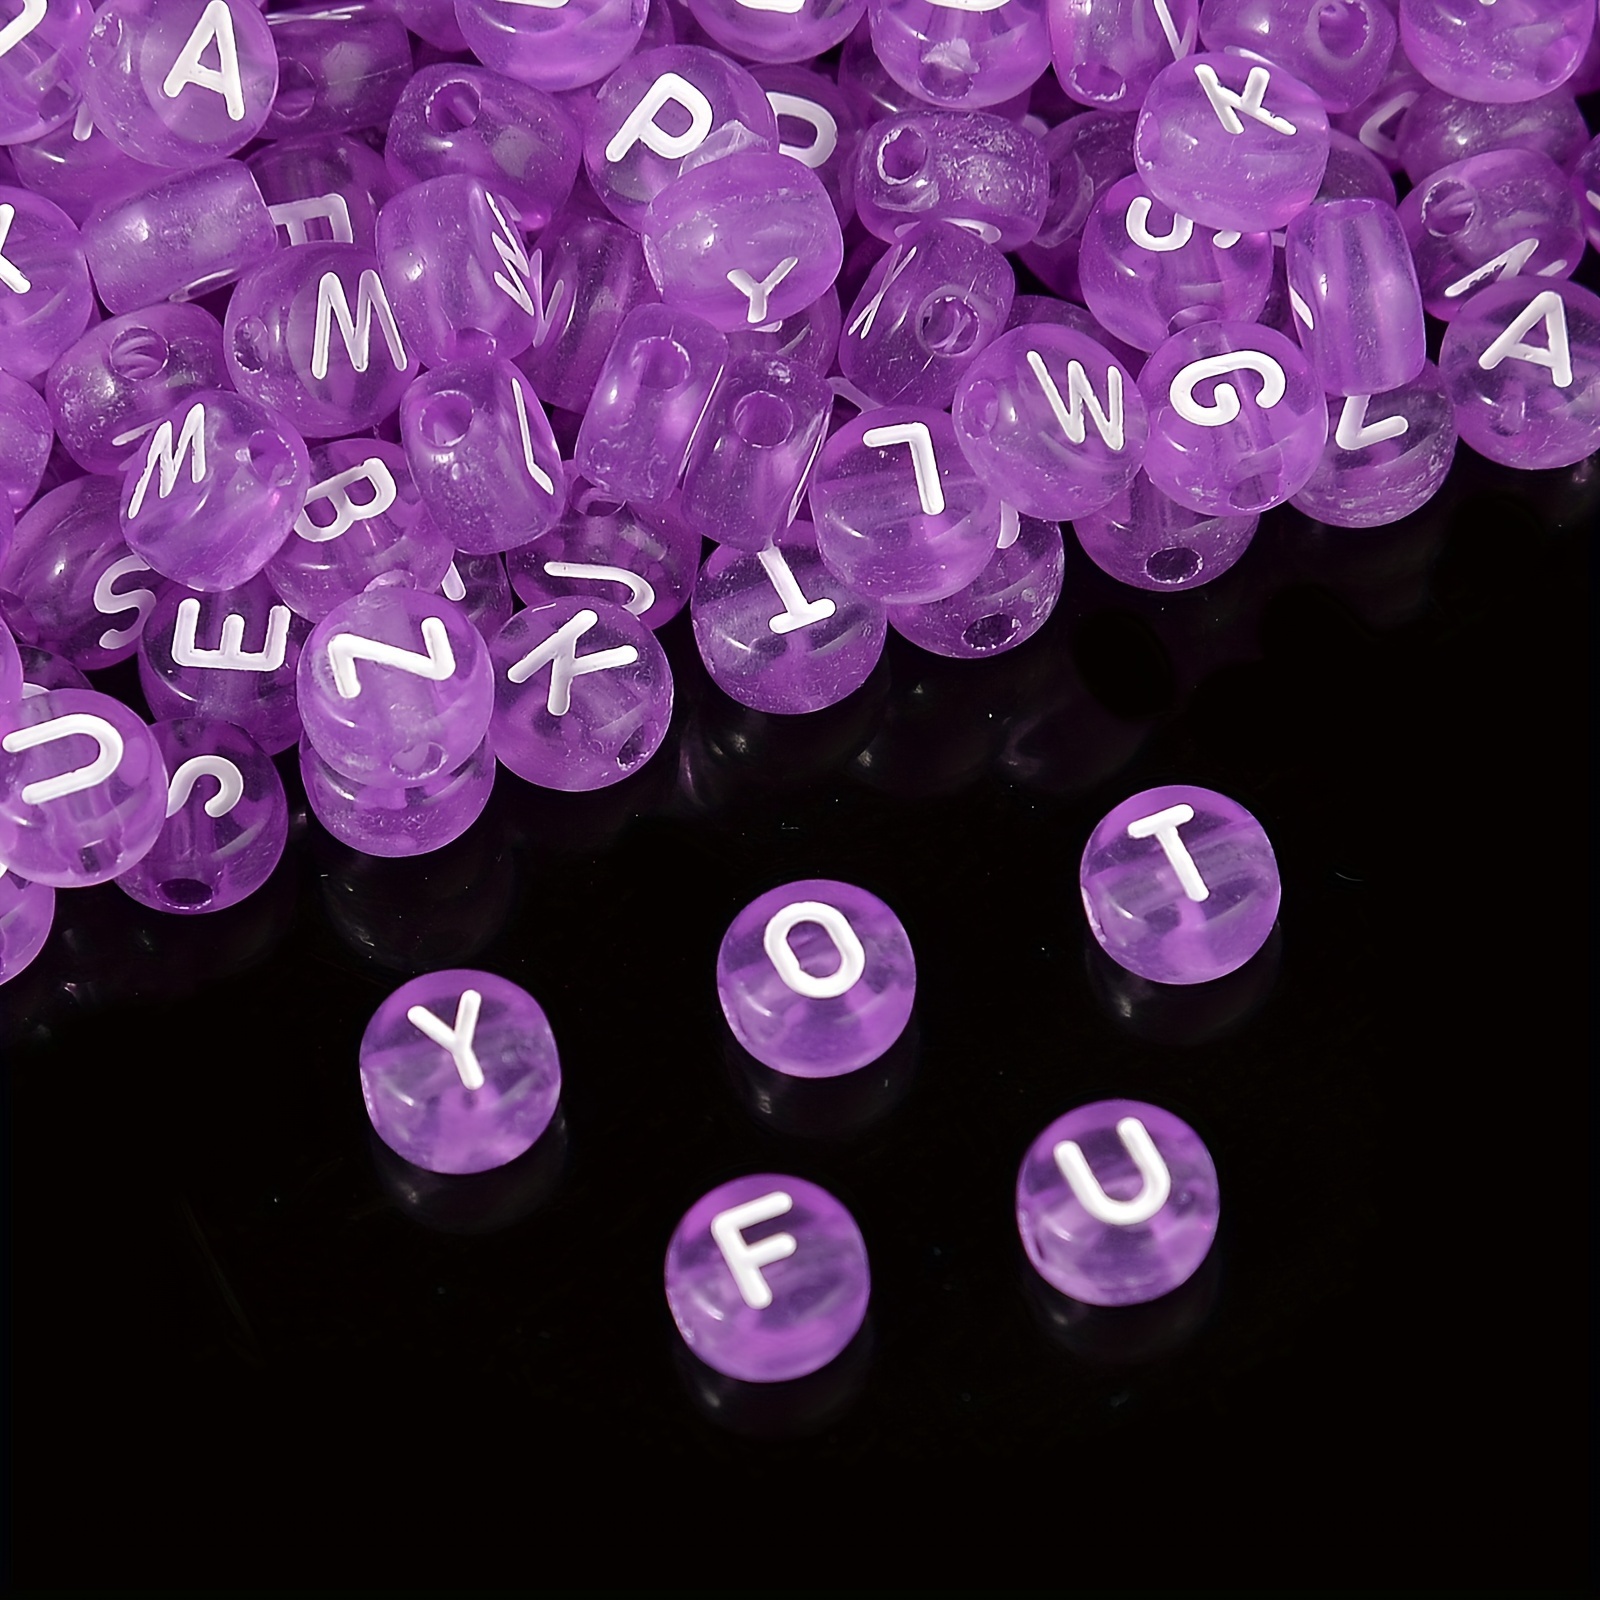 

500pcs Transparent Purple With White Letter Acrylic Beads For Jewelry Making Diy Fashion Bracelet Necklace Other Beaded Decors Handmade Craft Supplies